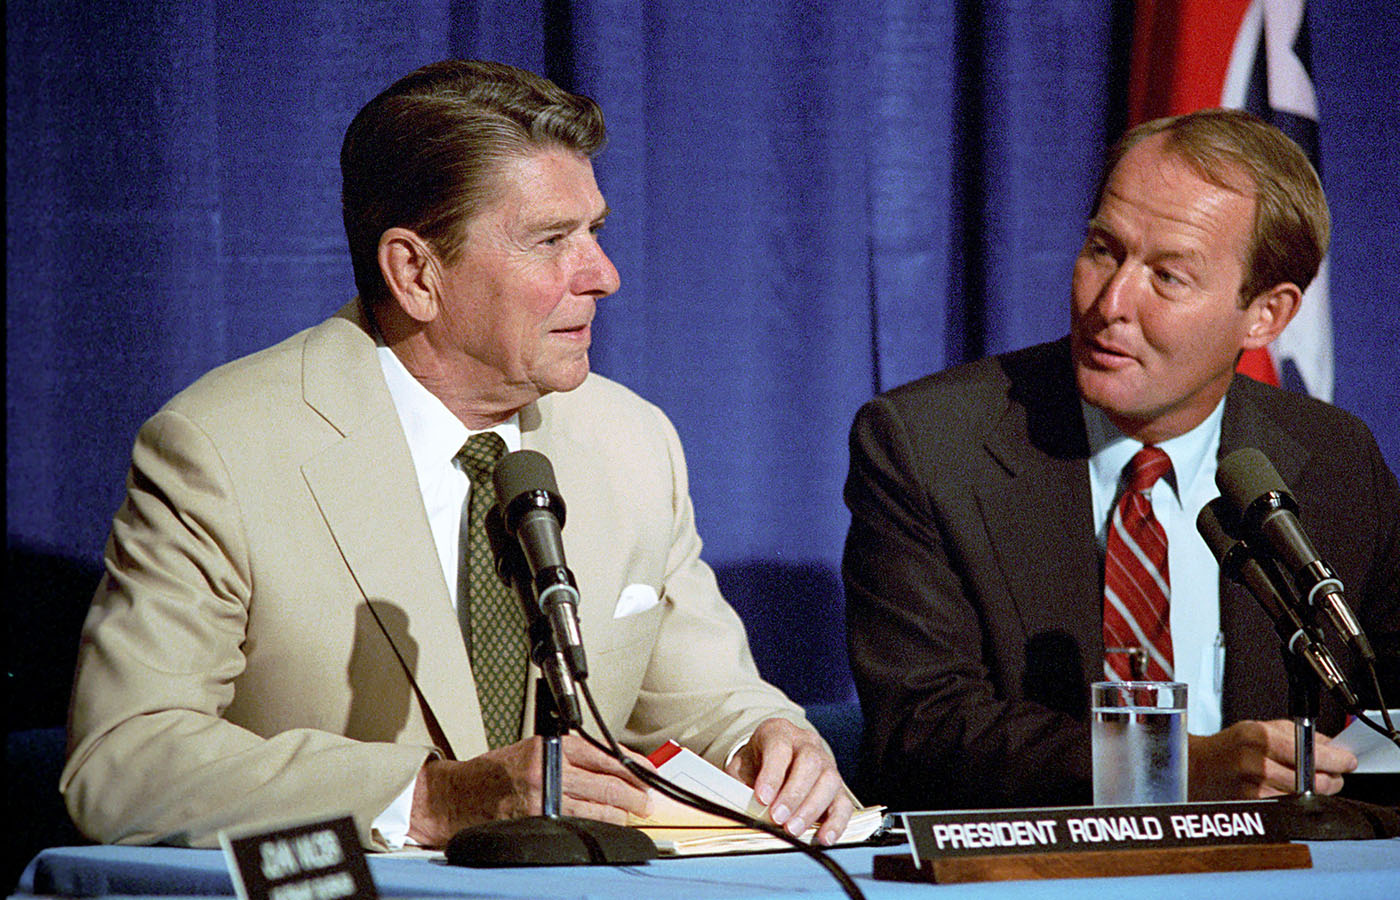 While governor of Tennessee, Alexander appears with President Ronald Reagan at Farragut High School in Knoxville to discuss the report released by the National Commission on Excellence in Education, June 14, 1983.